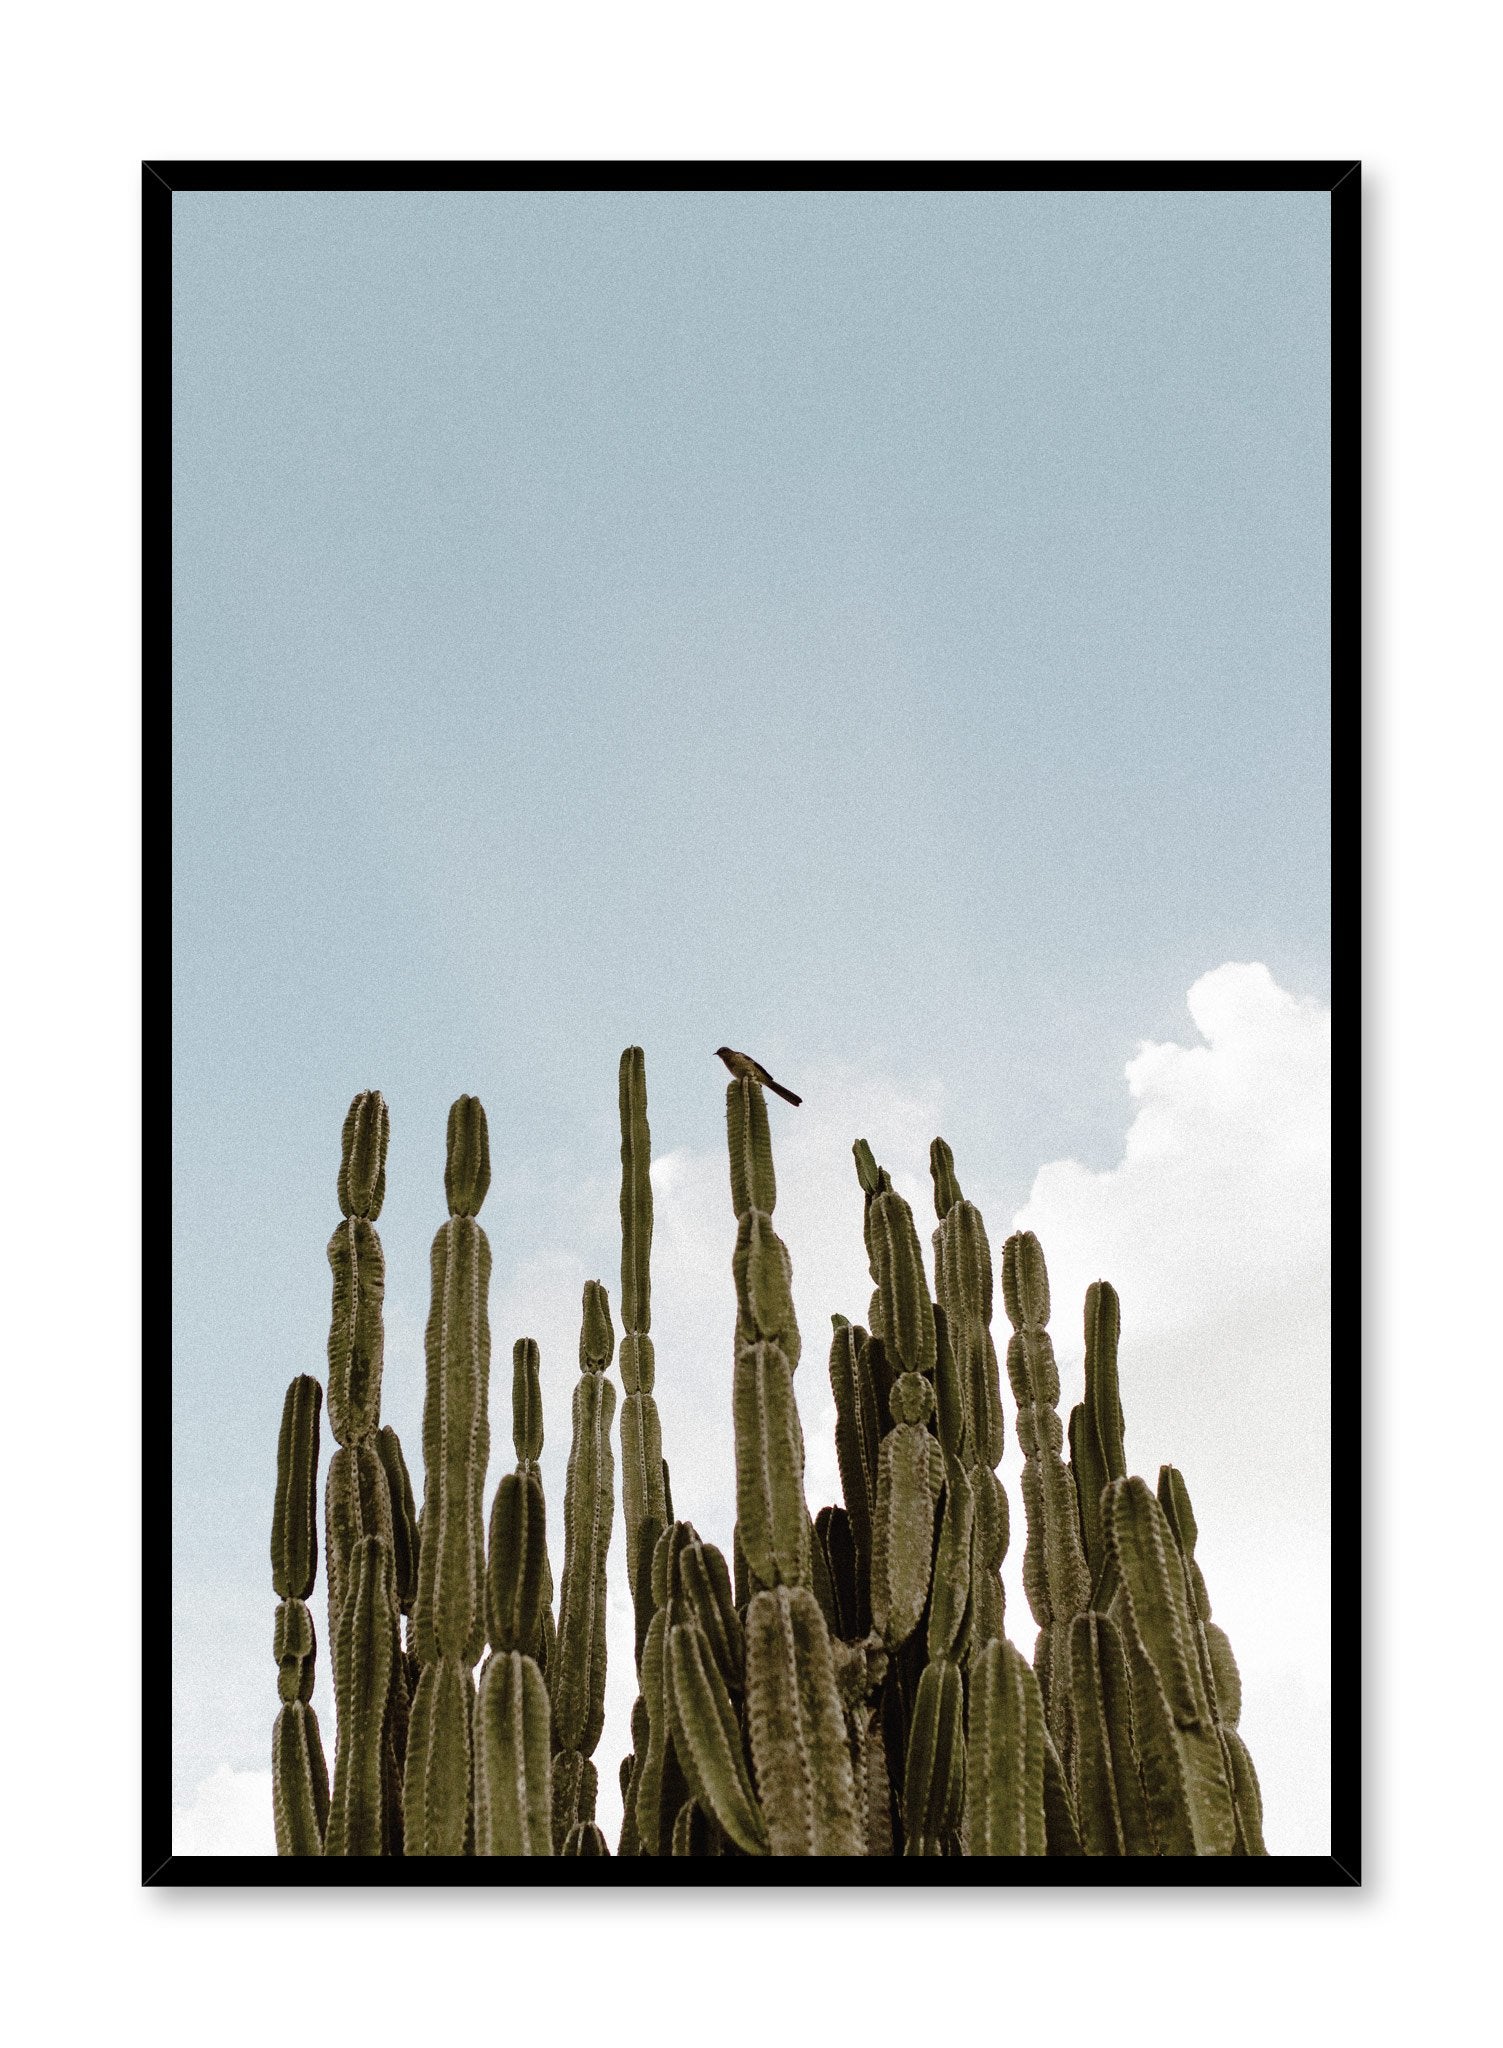 Modern minimalist photography by Opposite Wall with cactus plant against blue sky.